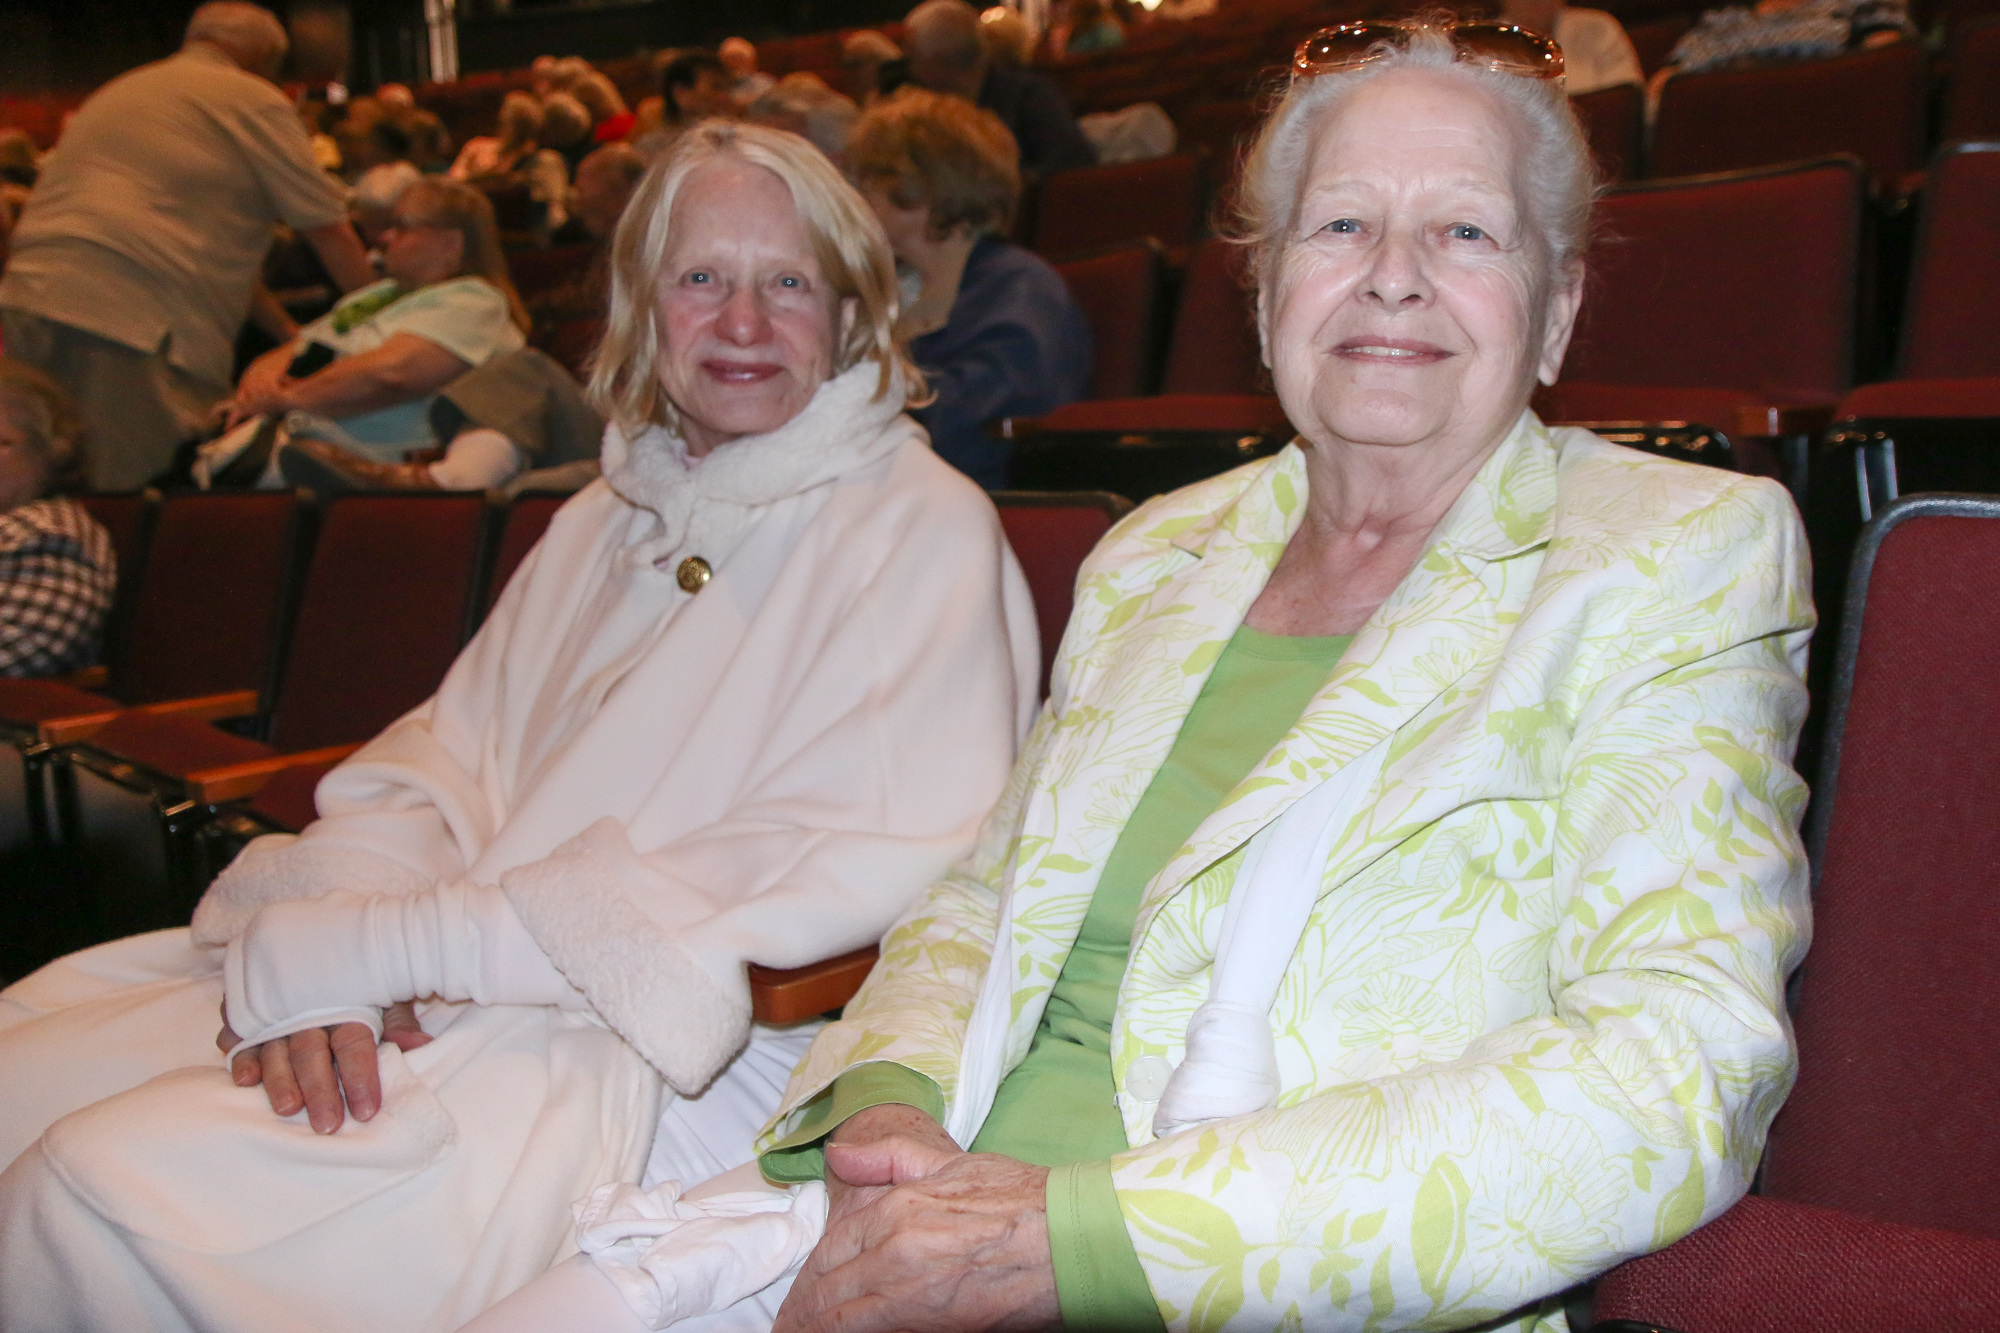 Sisters Joan Clay and Phyllis Knight reminisce about their youth in Steubenville, Ohio, where Clay went to school with Dean Martin. Photo by Paige Wilson